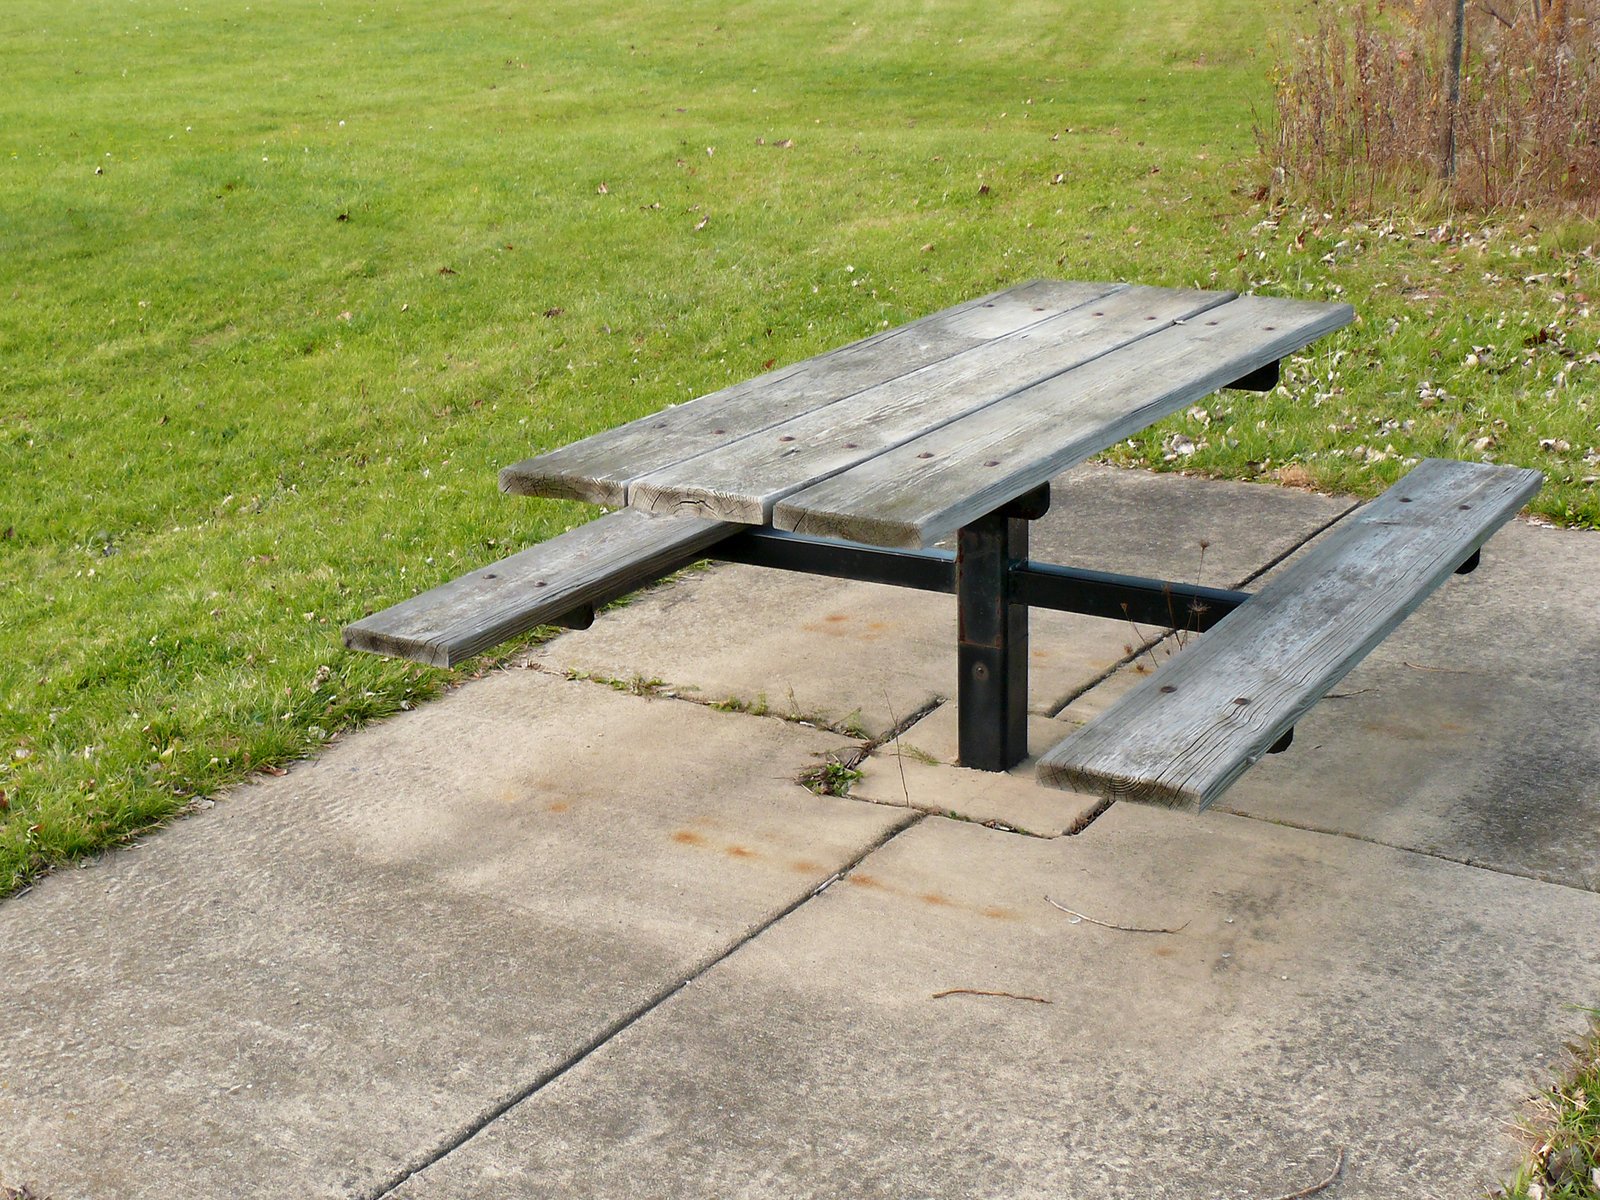 a small picnic table sitting on concrete in the grass